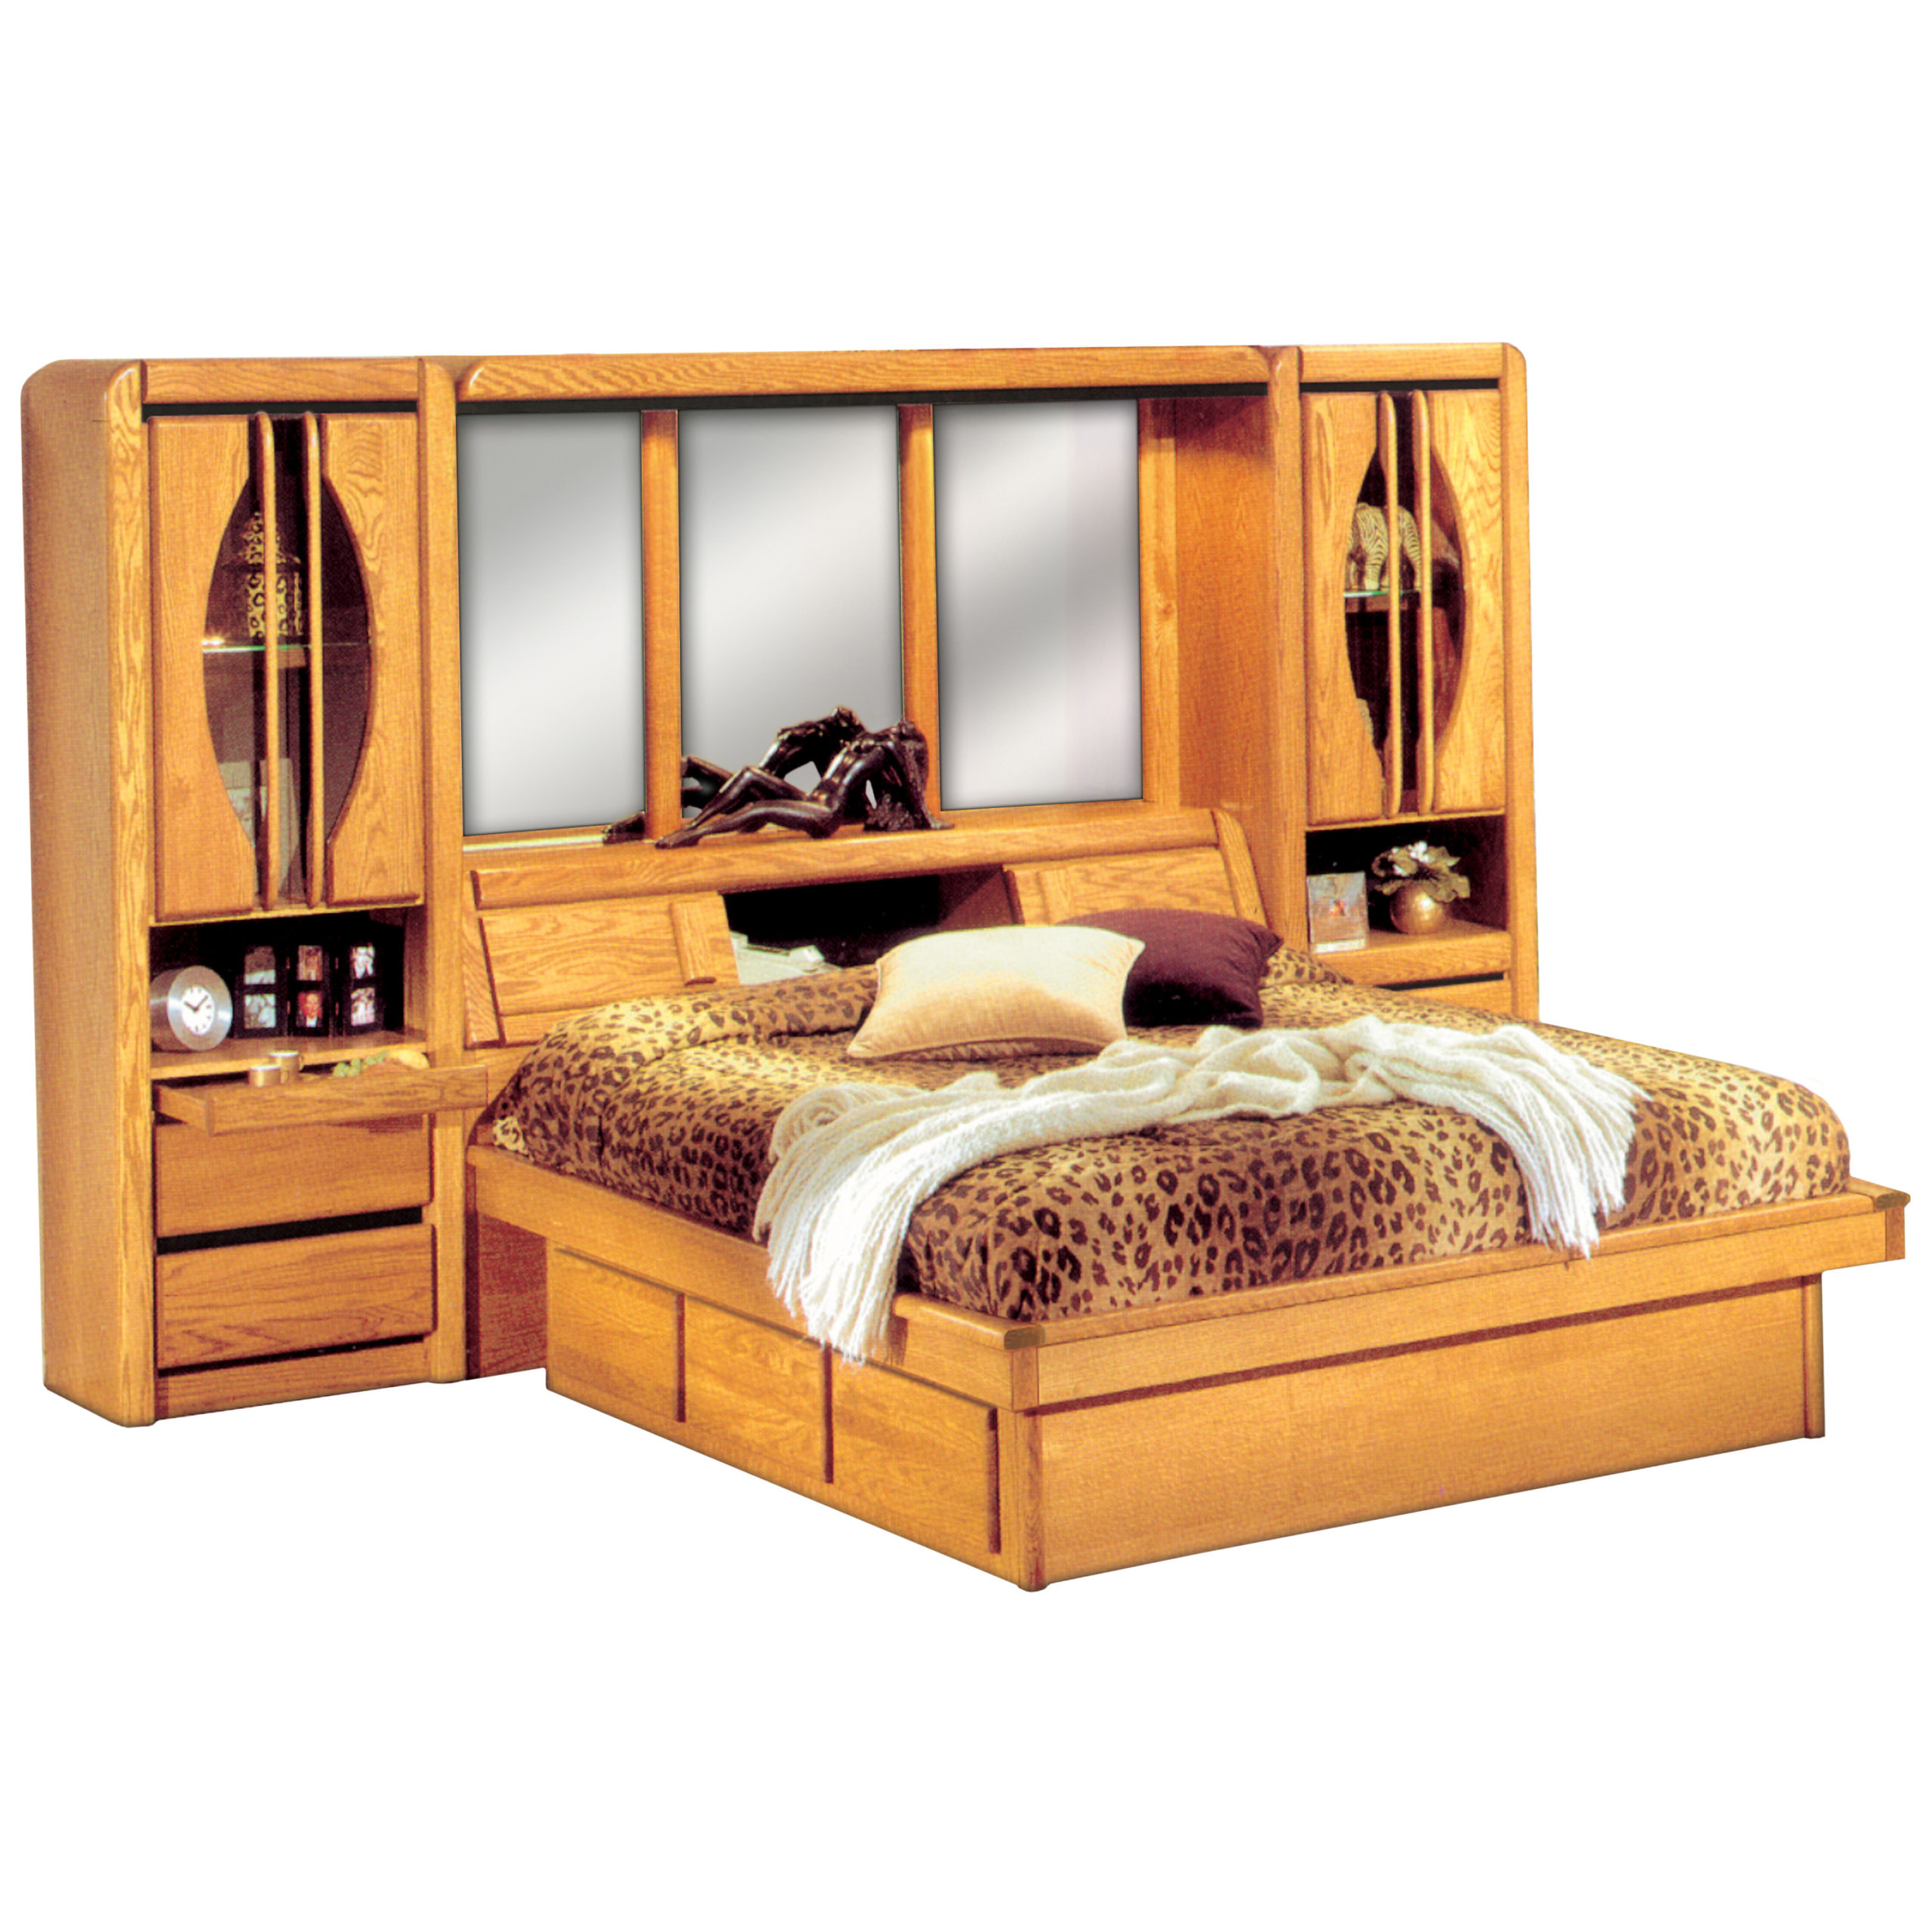 Matrix Wall Unit Casepieces Innomax, Queen Size Bedroom Wall Unit With Headboard